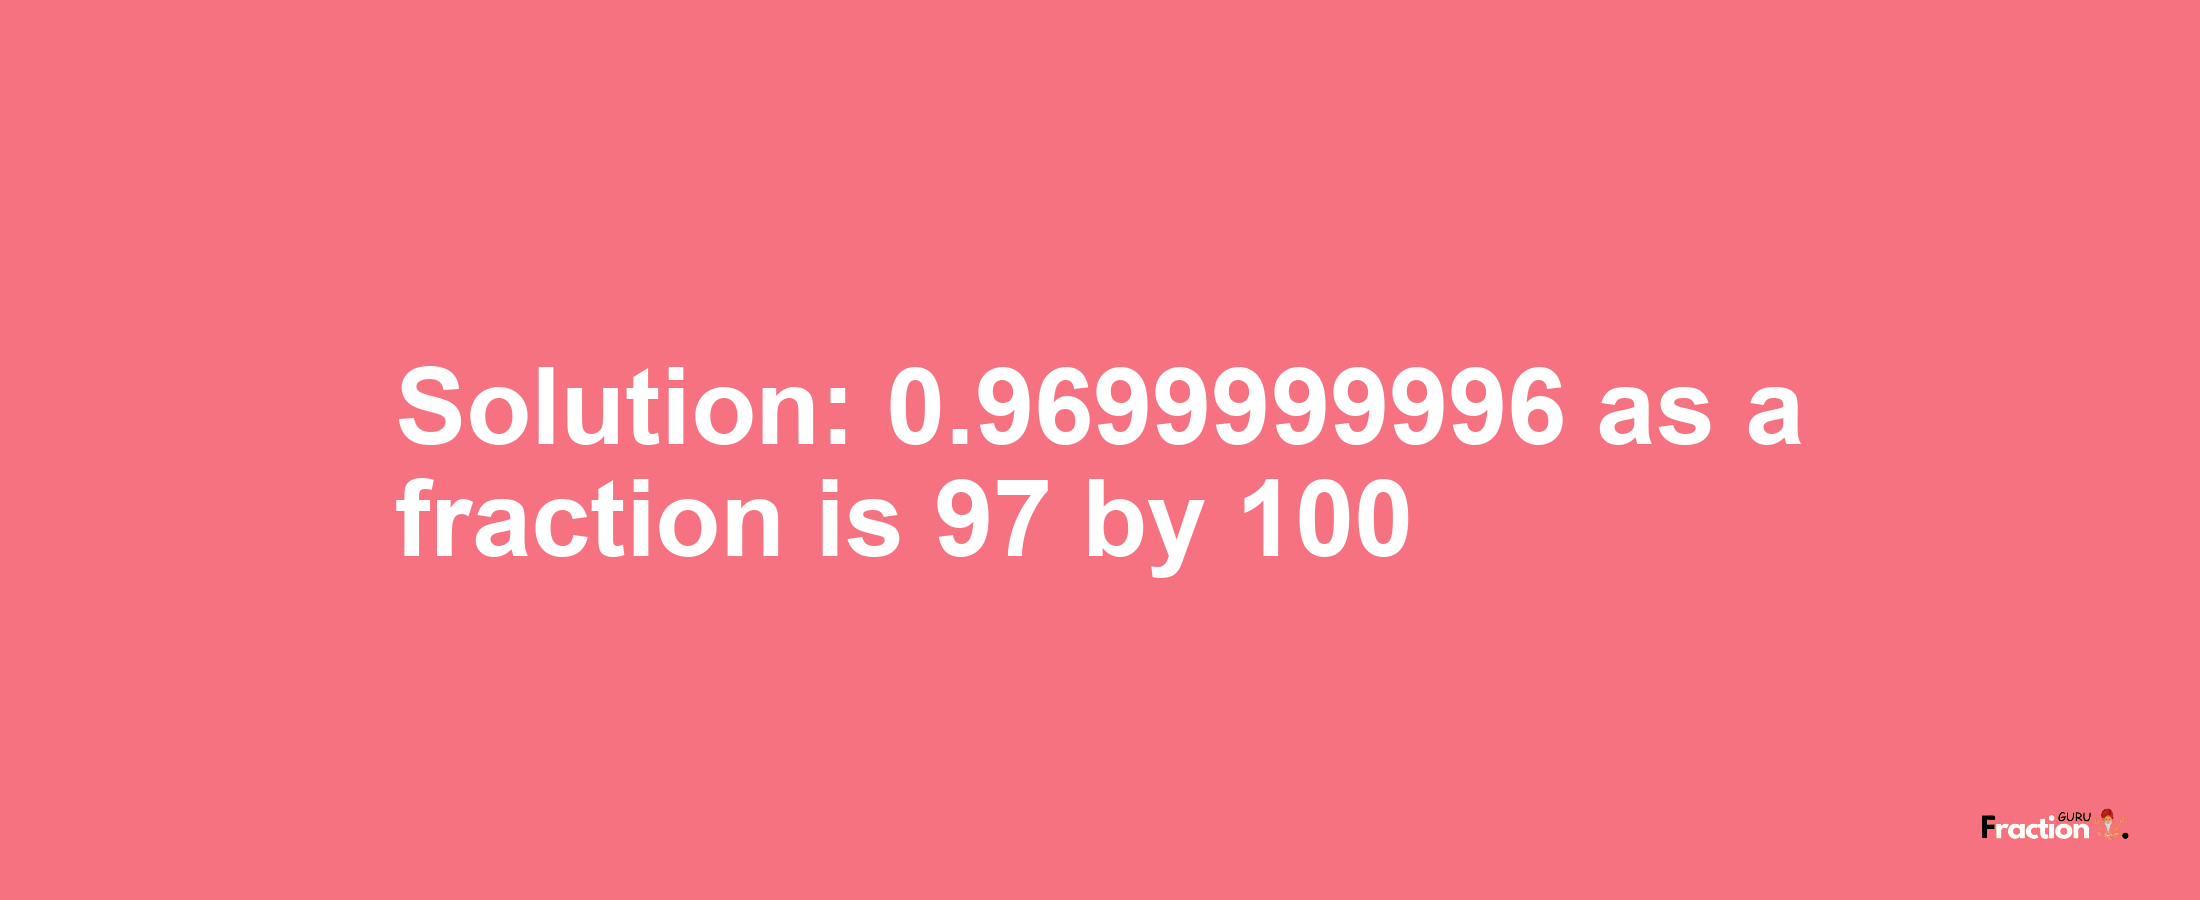 Solution:0.9699999996 as a fraction is 97/100